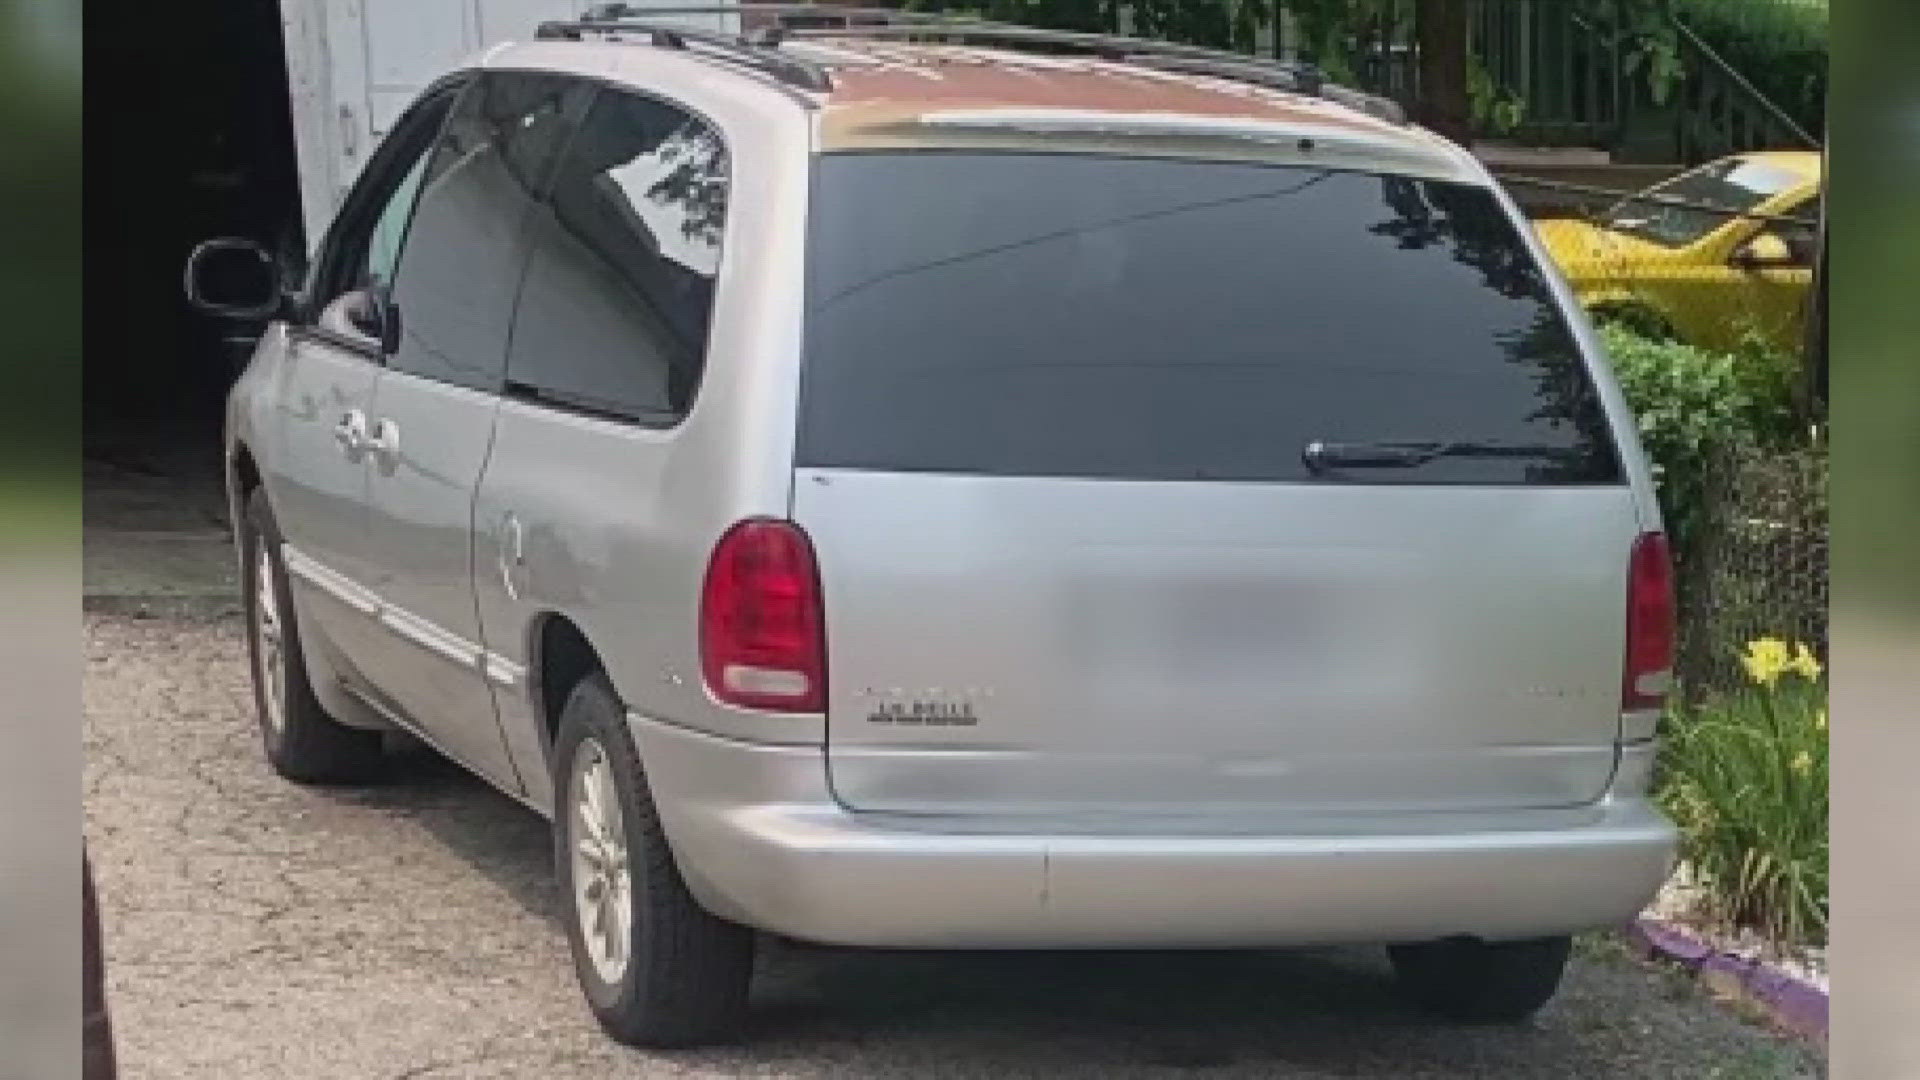 Gertrude Forest says someone stolen her minivan right from her driveway last month. 3News' Lindsay Buckingham reports.